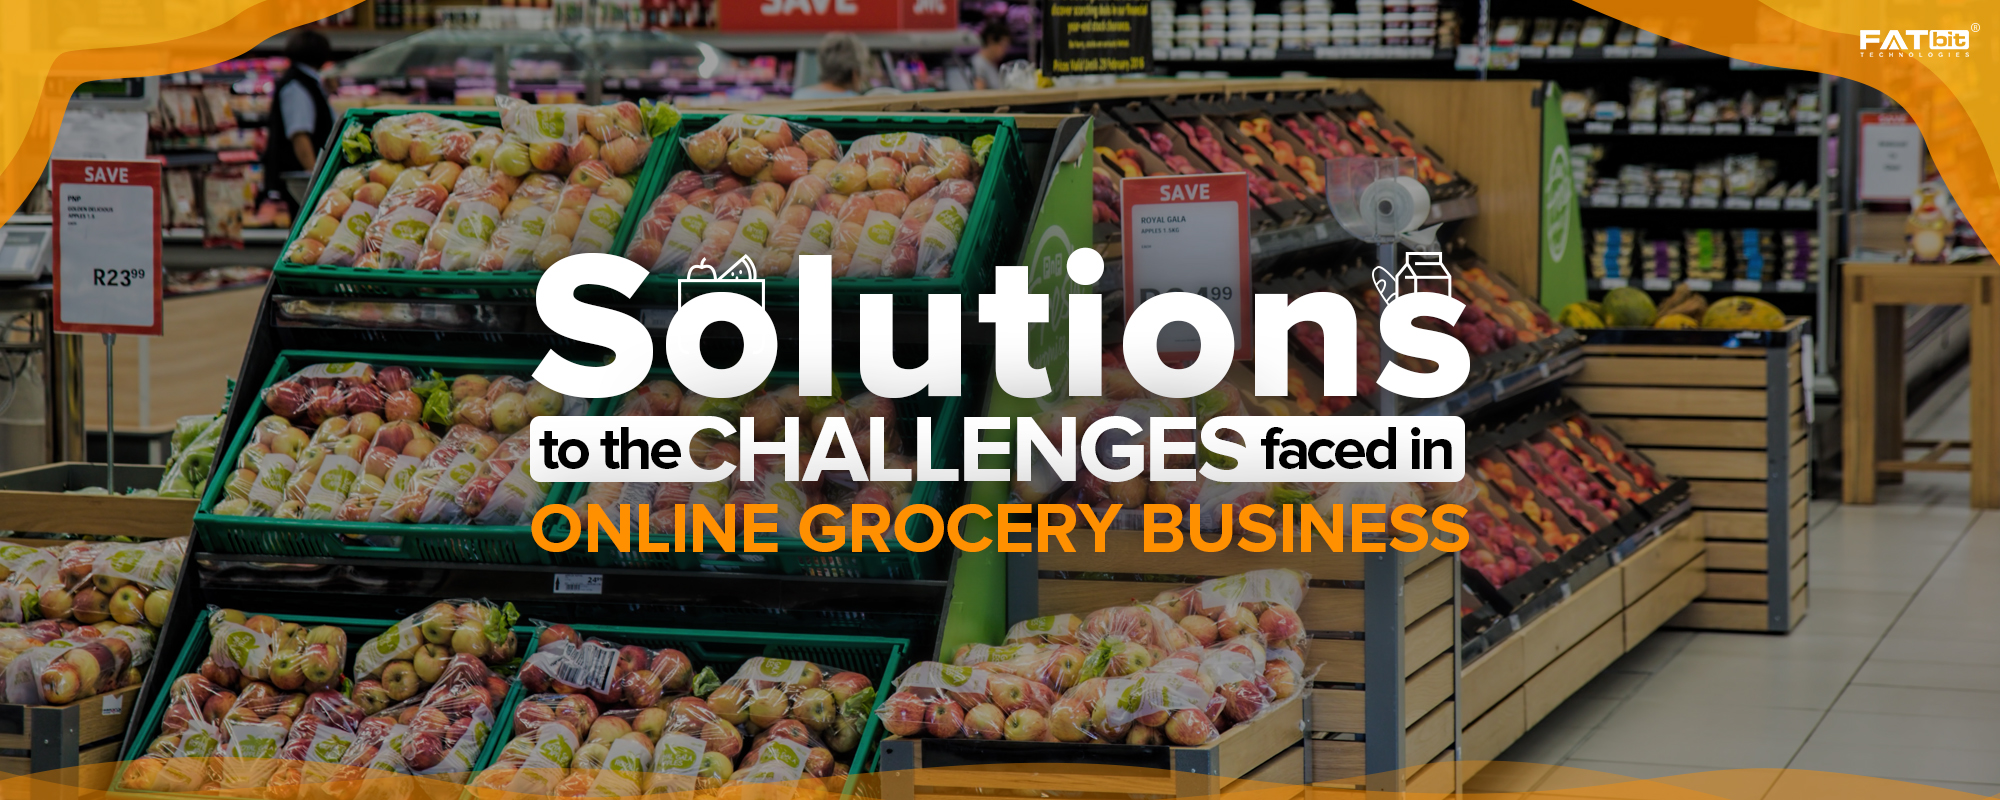 Challenges Faced by Online Grocery Businesses & Their Solutions